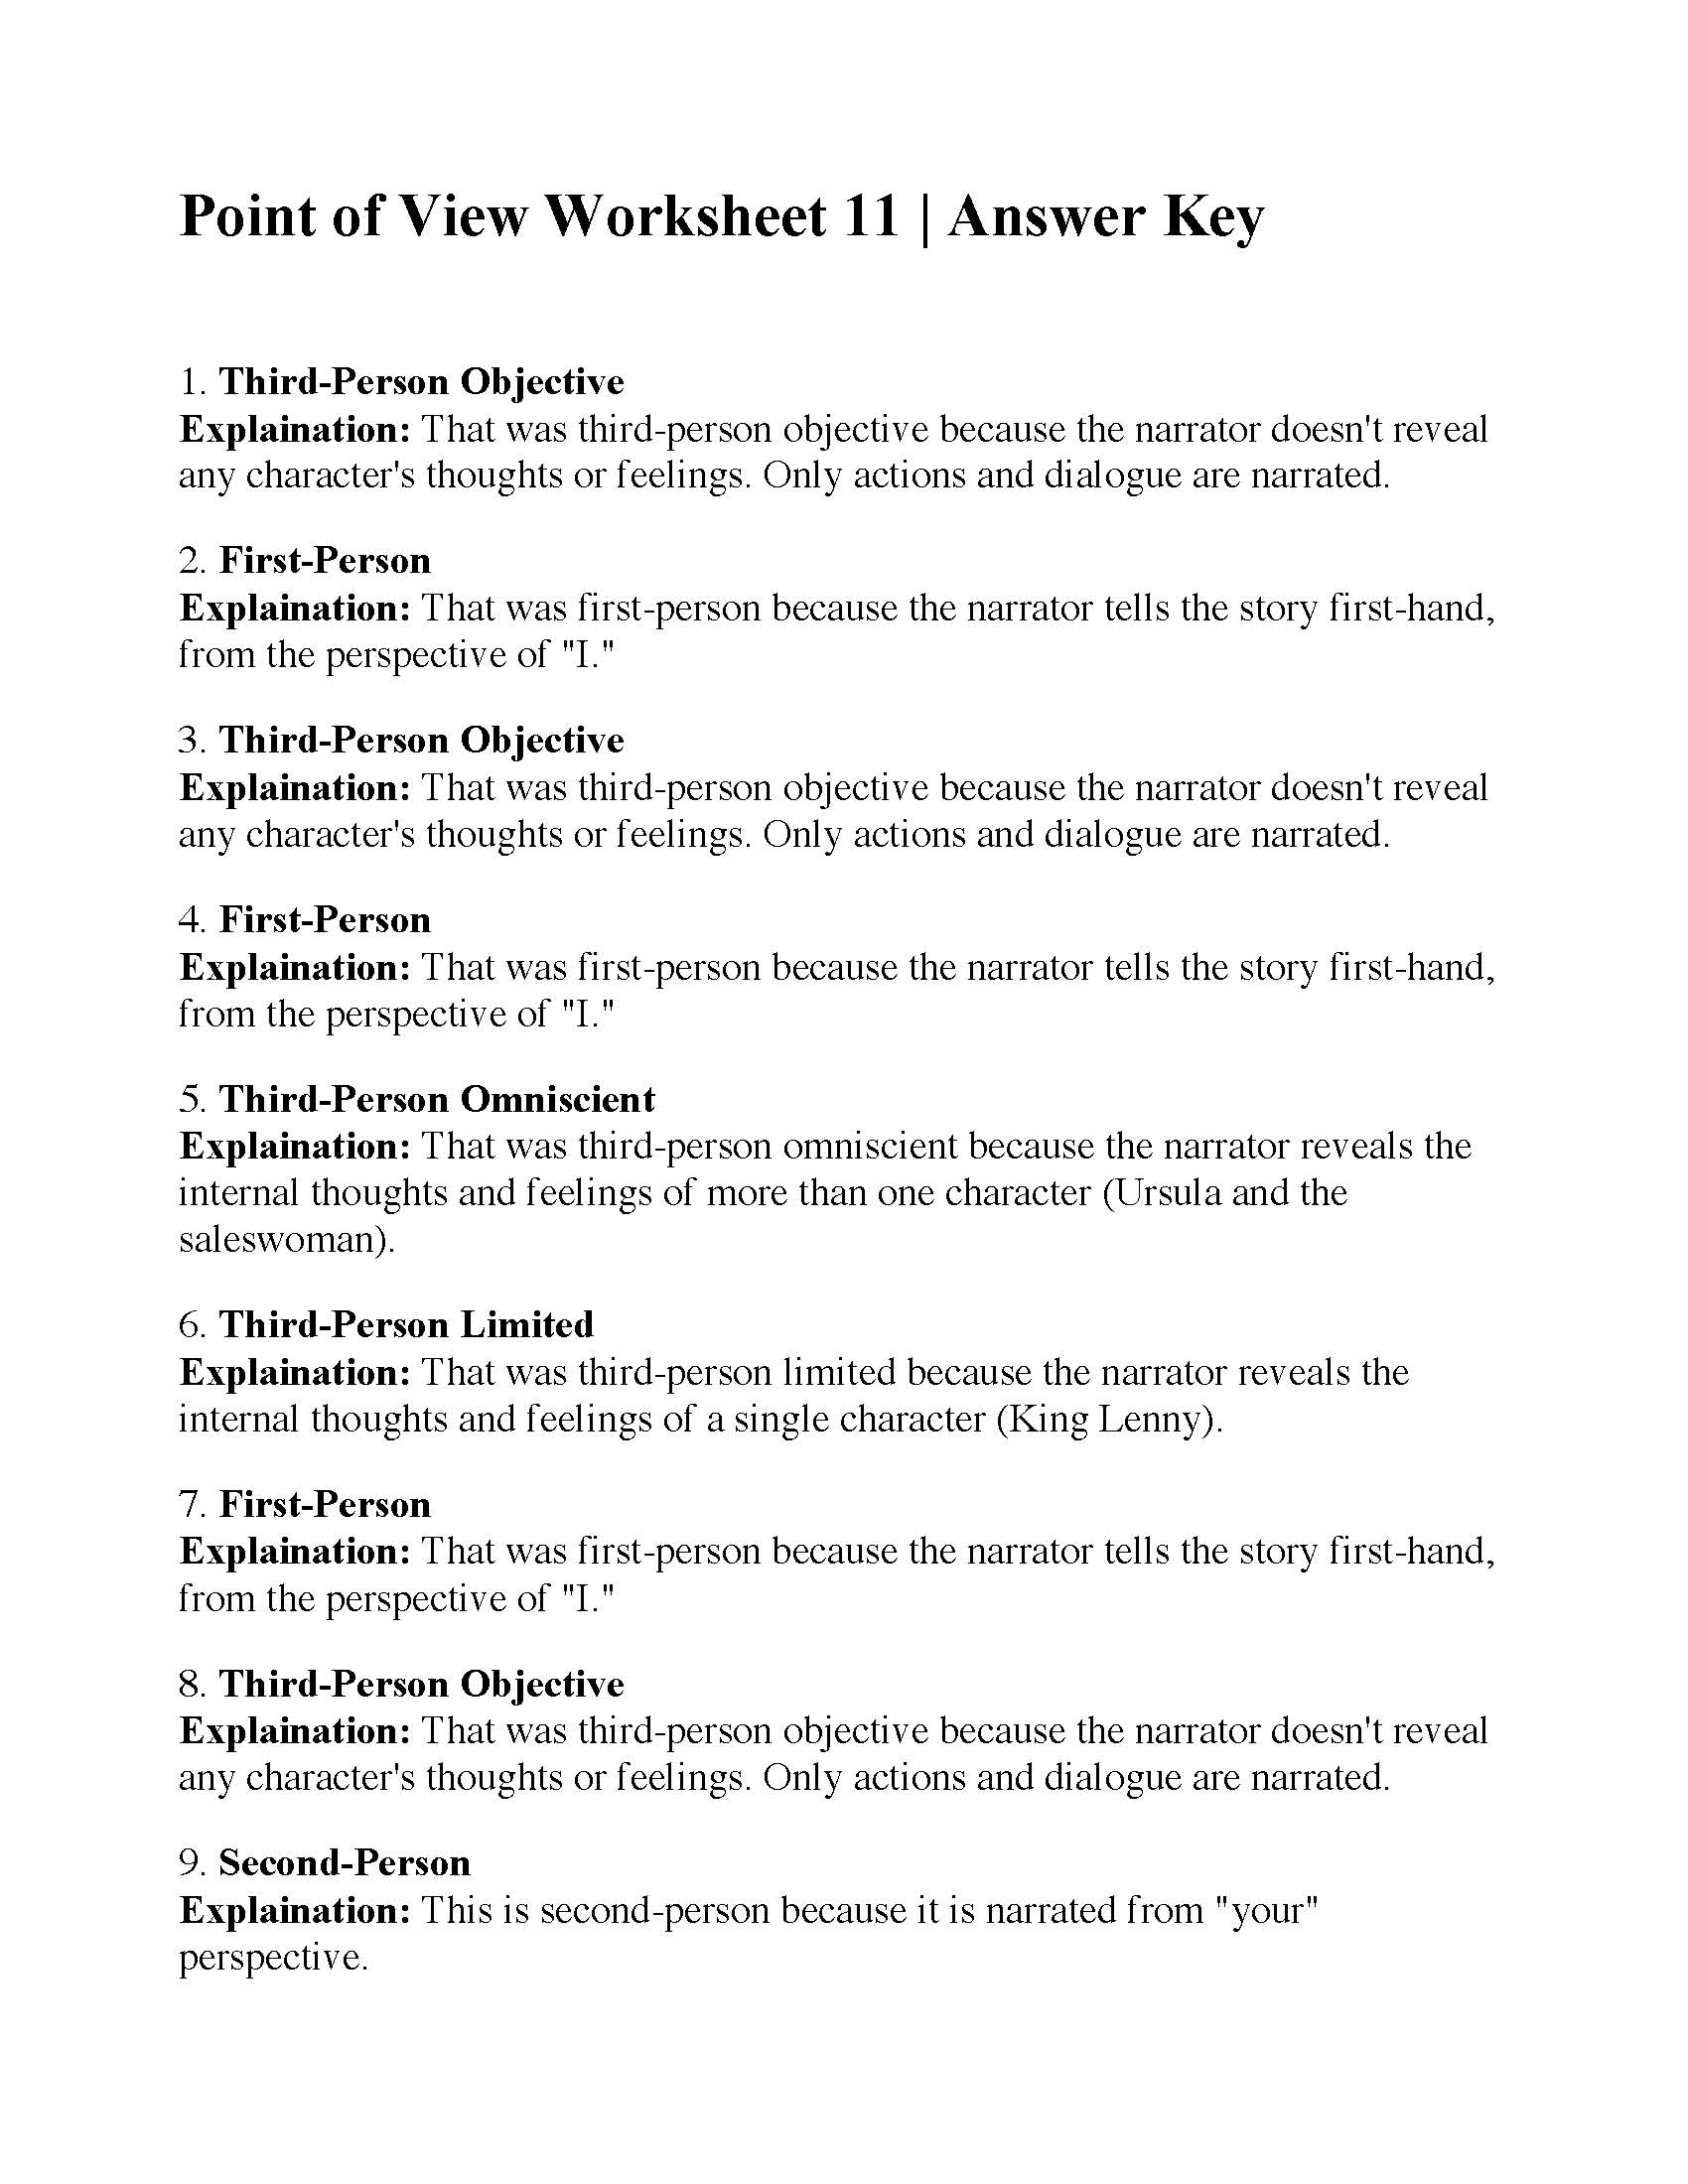 Point of View Worksheet 20  Answers In Point Of View Worksheet 11